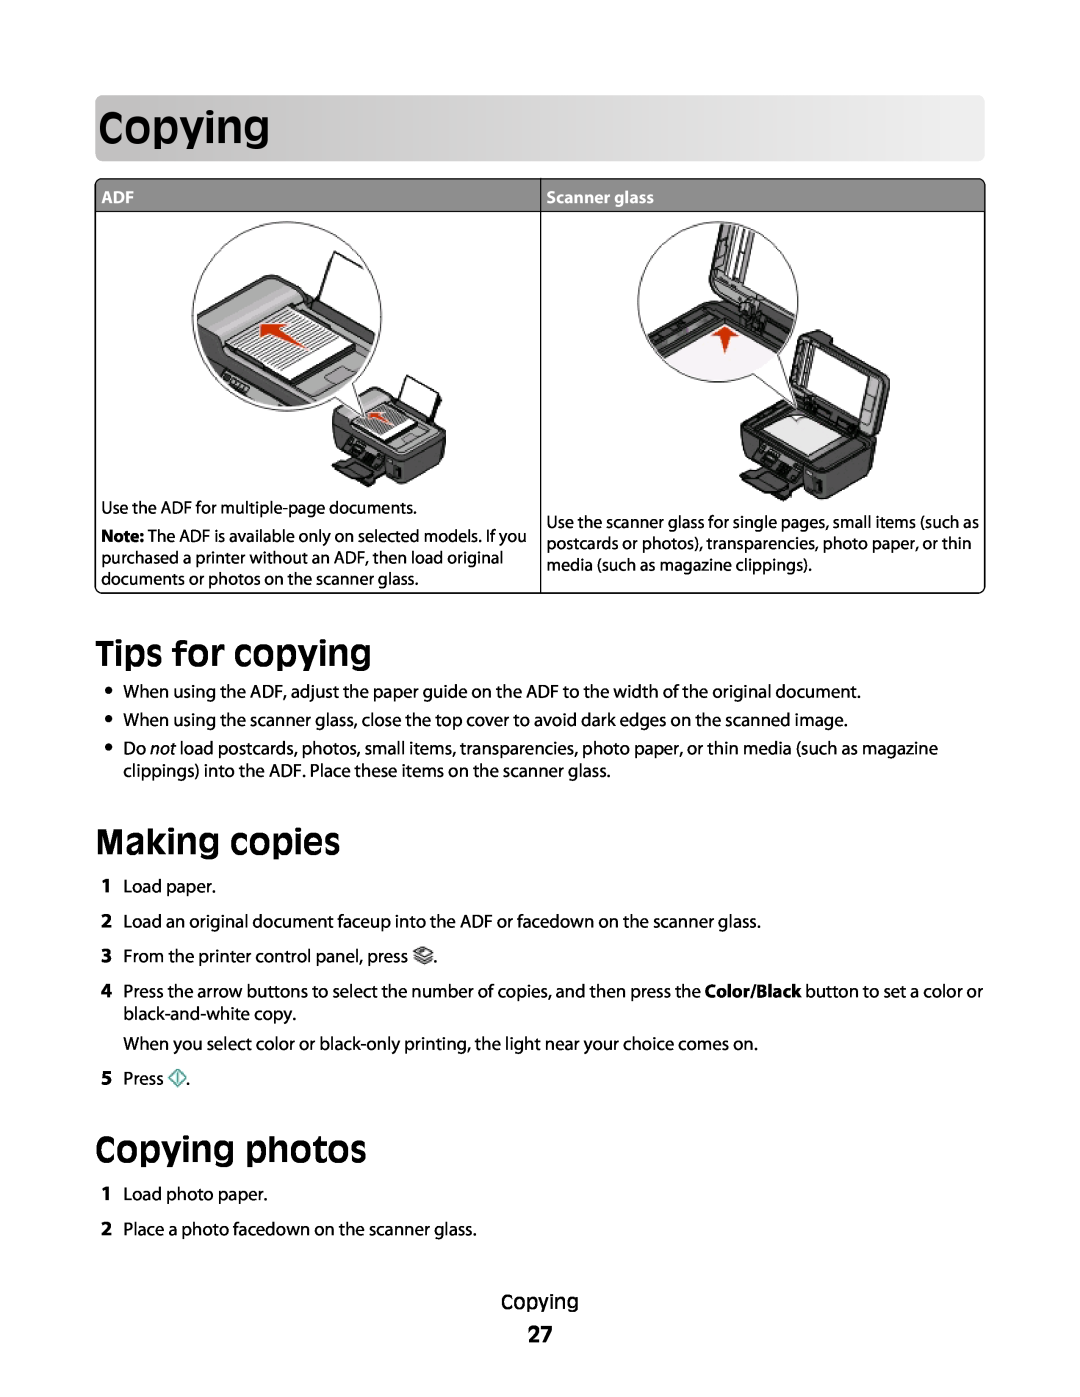 Lexmark S400 manual Tips for copying, Making copies, Copying photos 